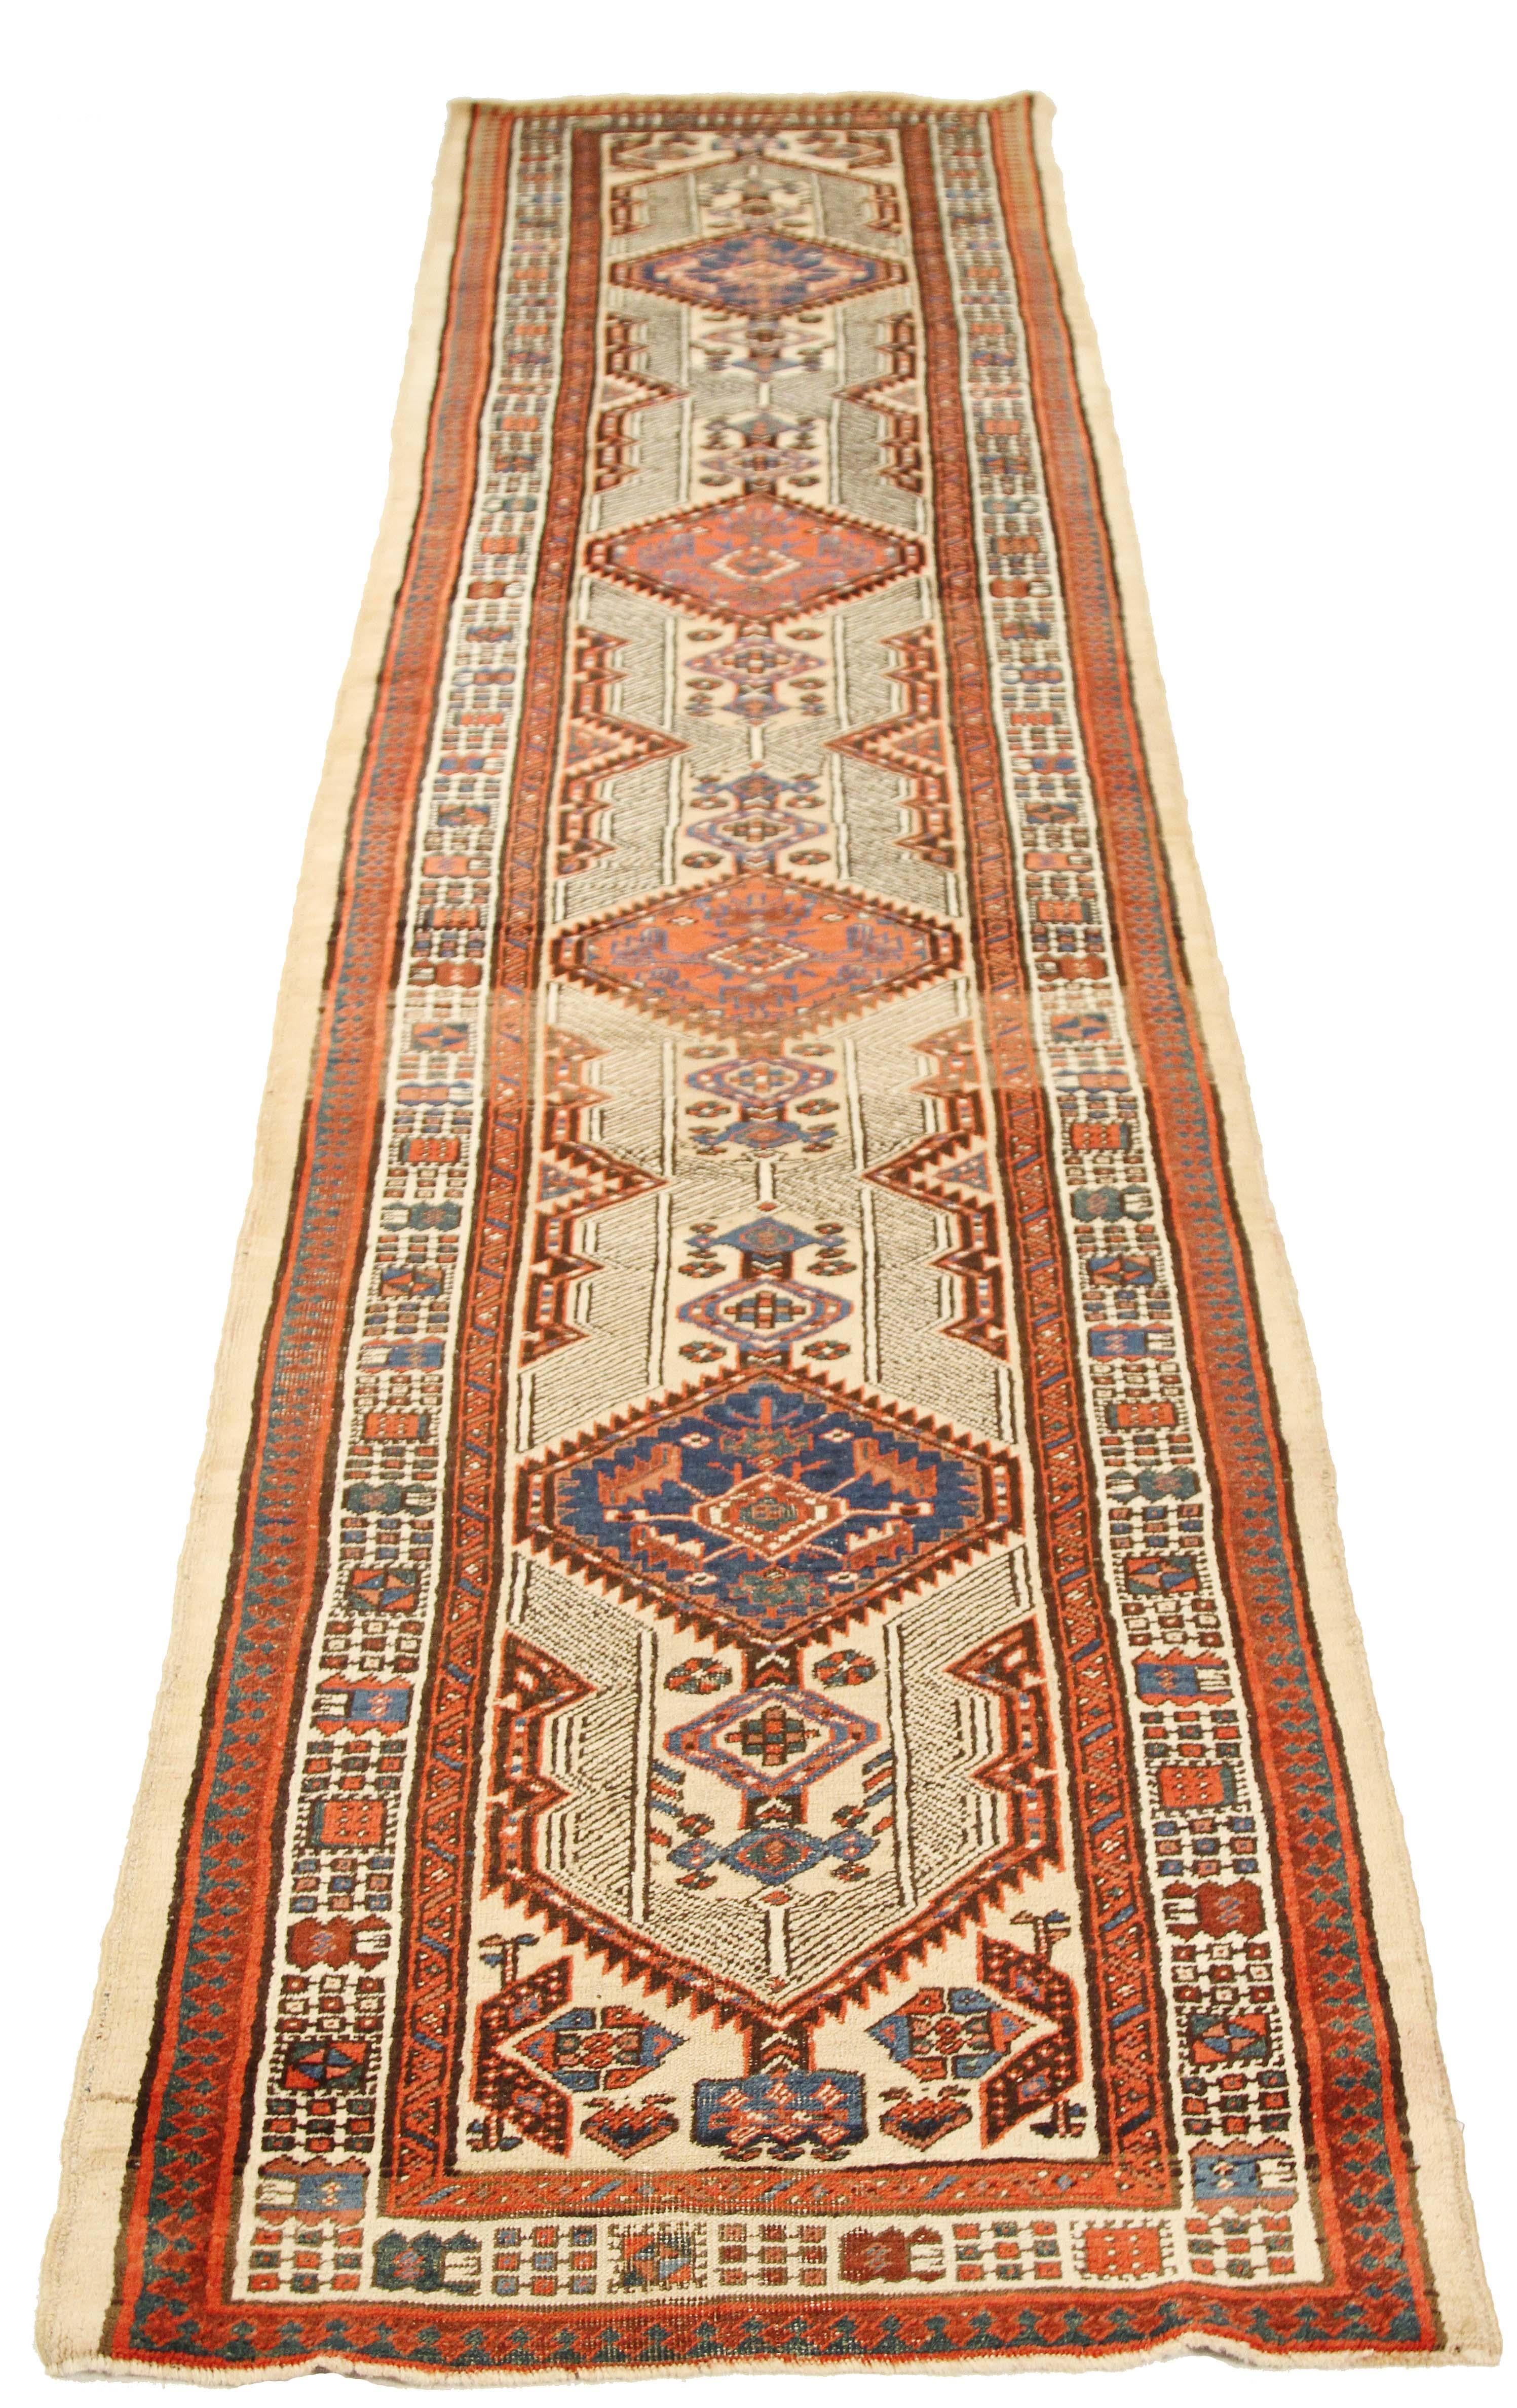 Antique Persian runner rug handwoven from the finest sheep’s wool and colored with all-natural vegetable dyes that are safe for humans and pets. It’s a traditional Sarab design featuring geometric details in black, beige and brown over an ivory